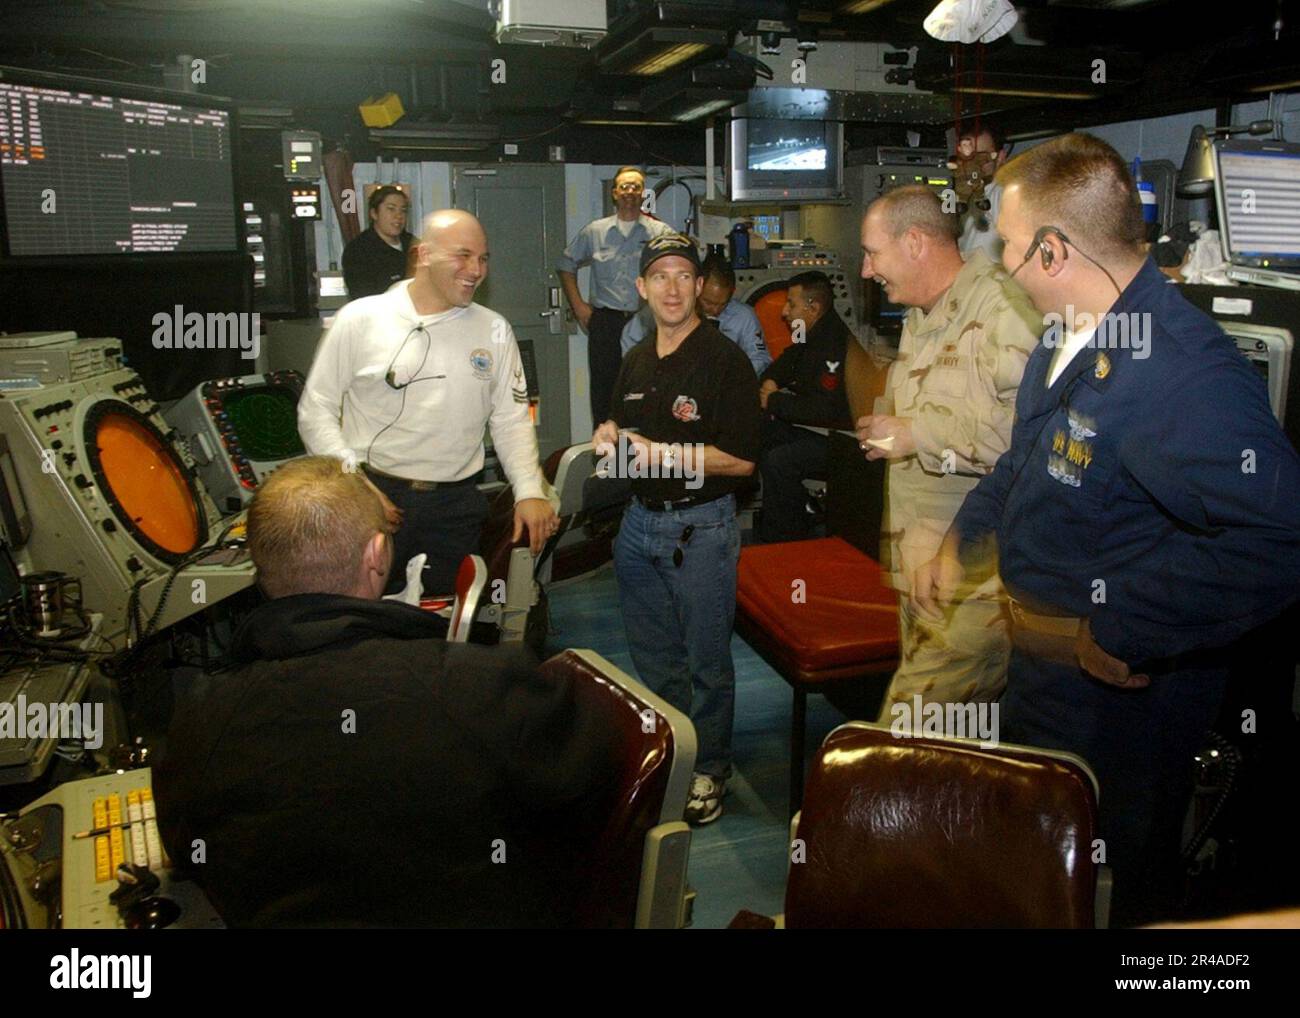 US Navy NASCAR Nextel Cup driver John Andretti pays a visit to the Air Traffic Control crew in the Carrier Air Traffic Control Center (CATCC) aboard the Nimitz-class aircraft carrier USS Harry S. Truman (CVN Stock Photo